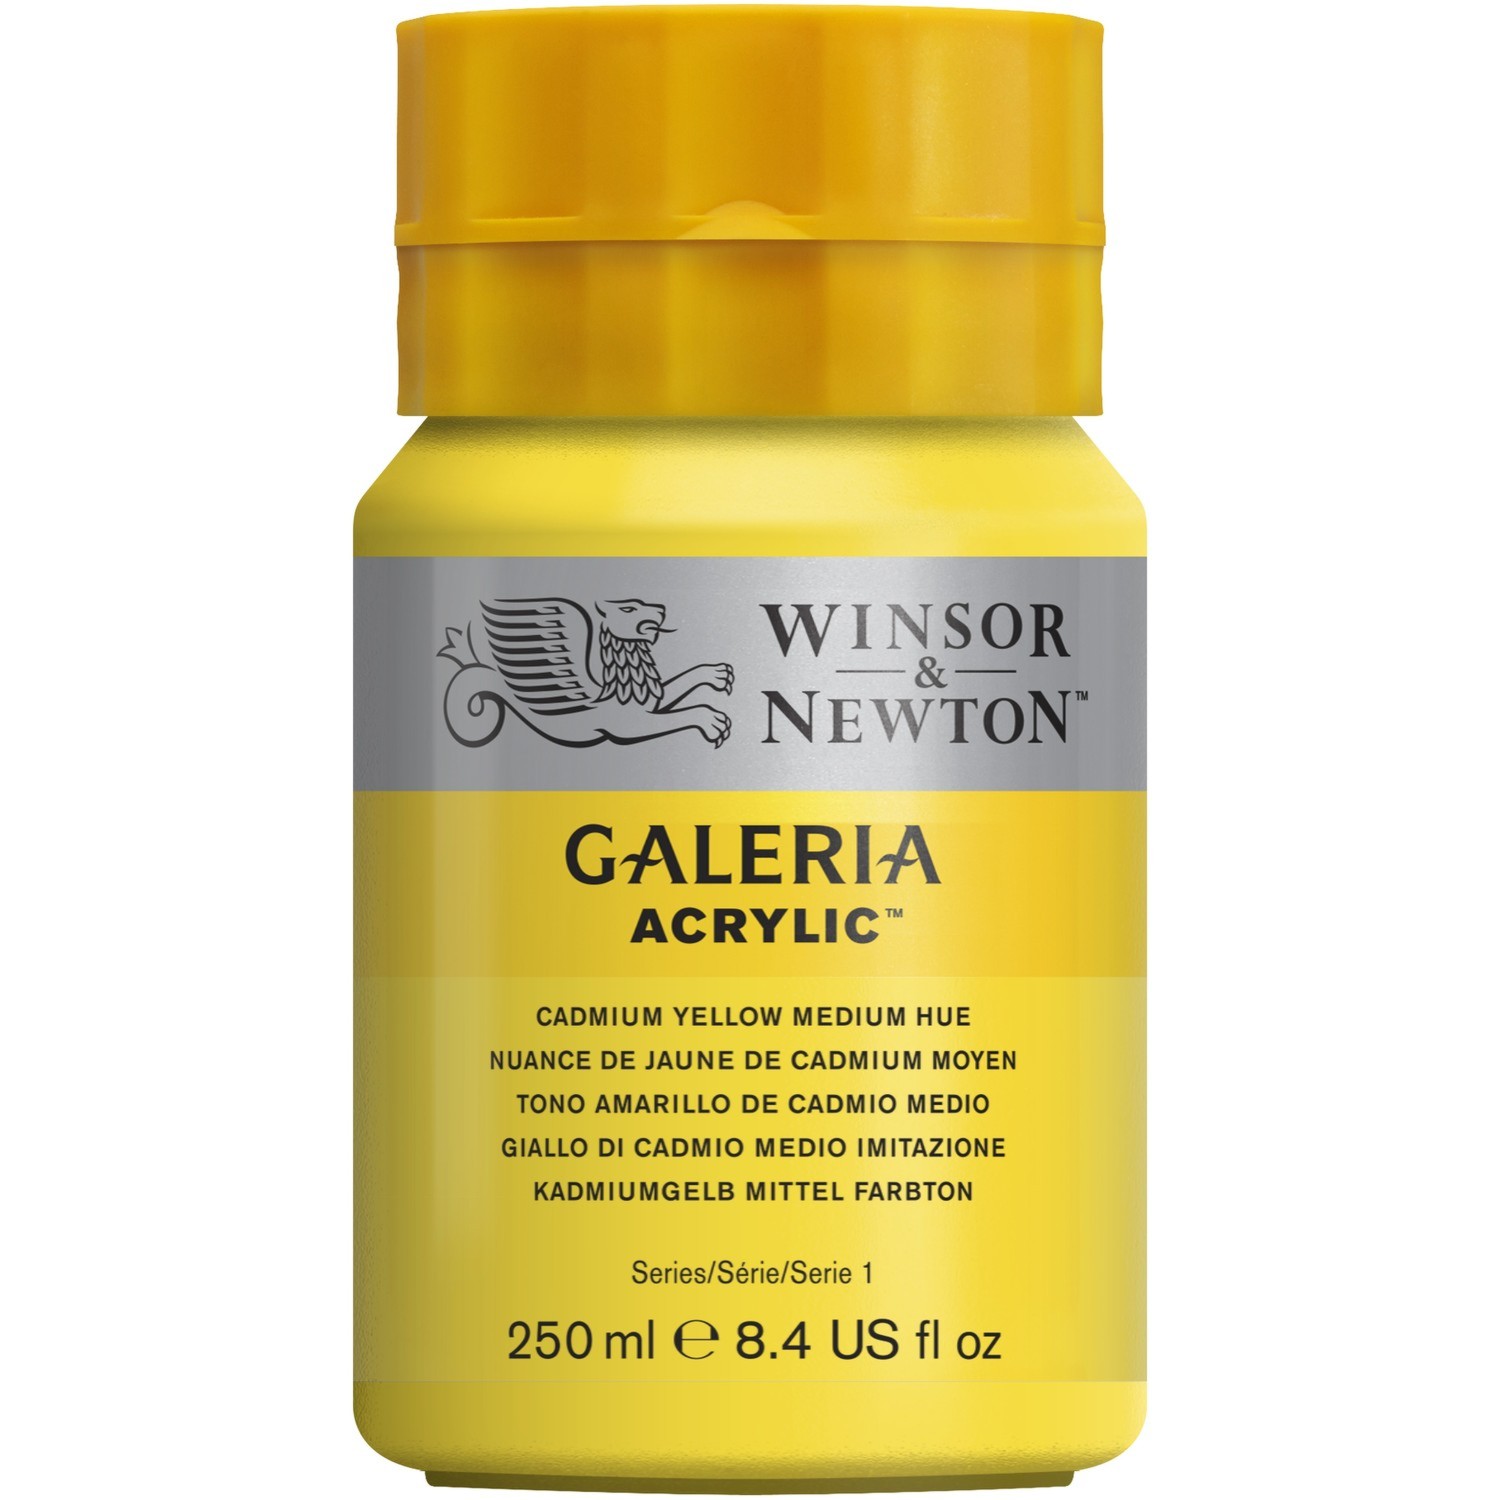 Winsor and Newton 250ml Galeria Acrylic Paint - Cad Yellow Med Image 1